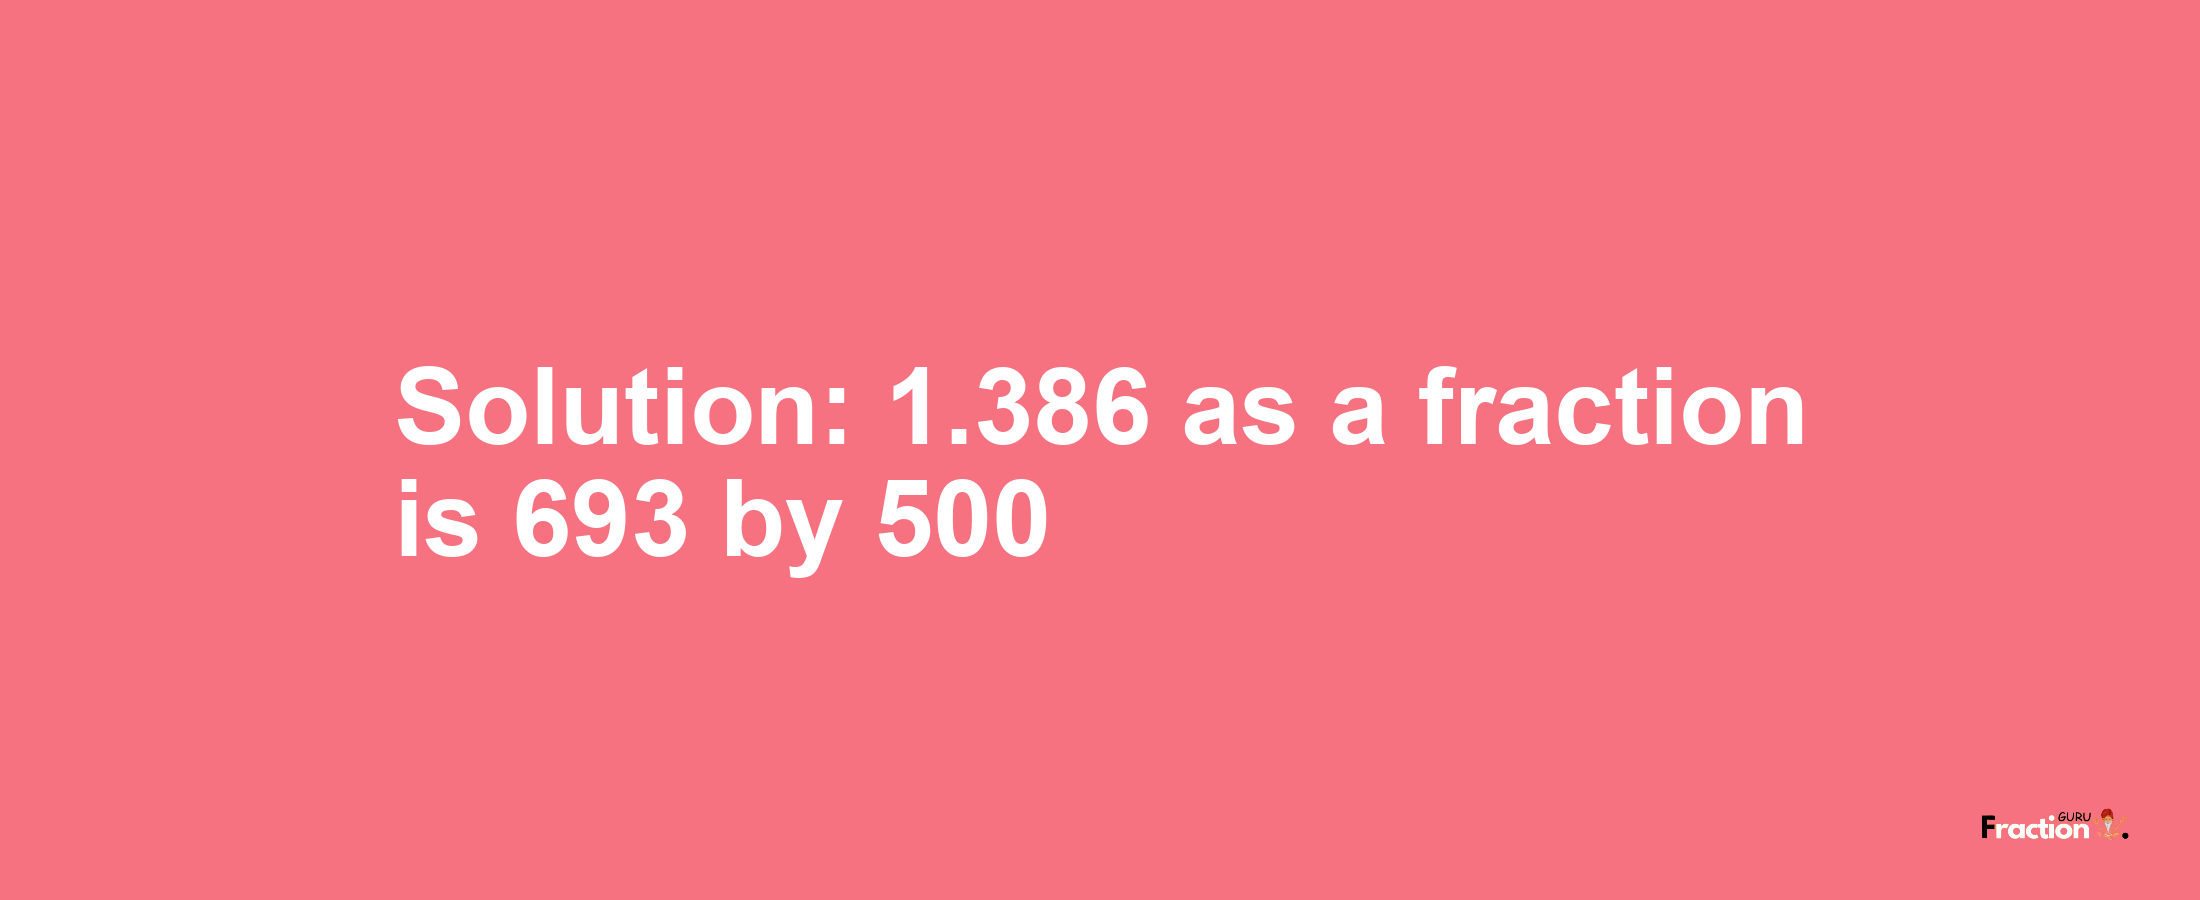 Solution:1.386 as a fraction is 693/500